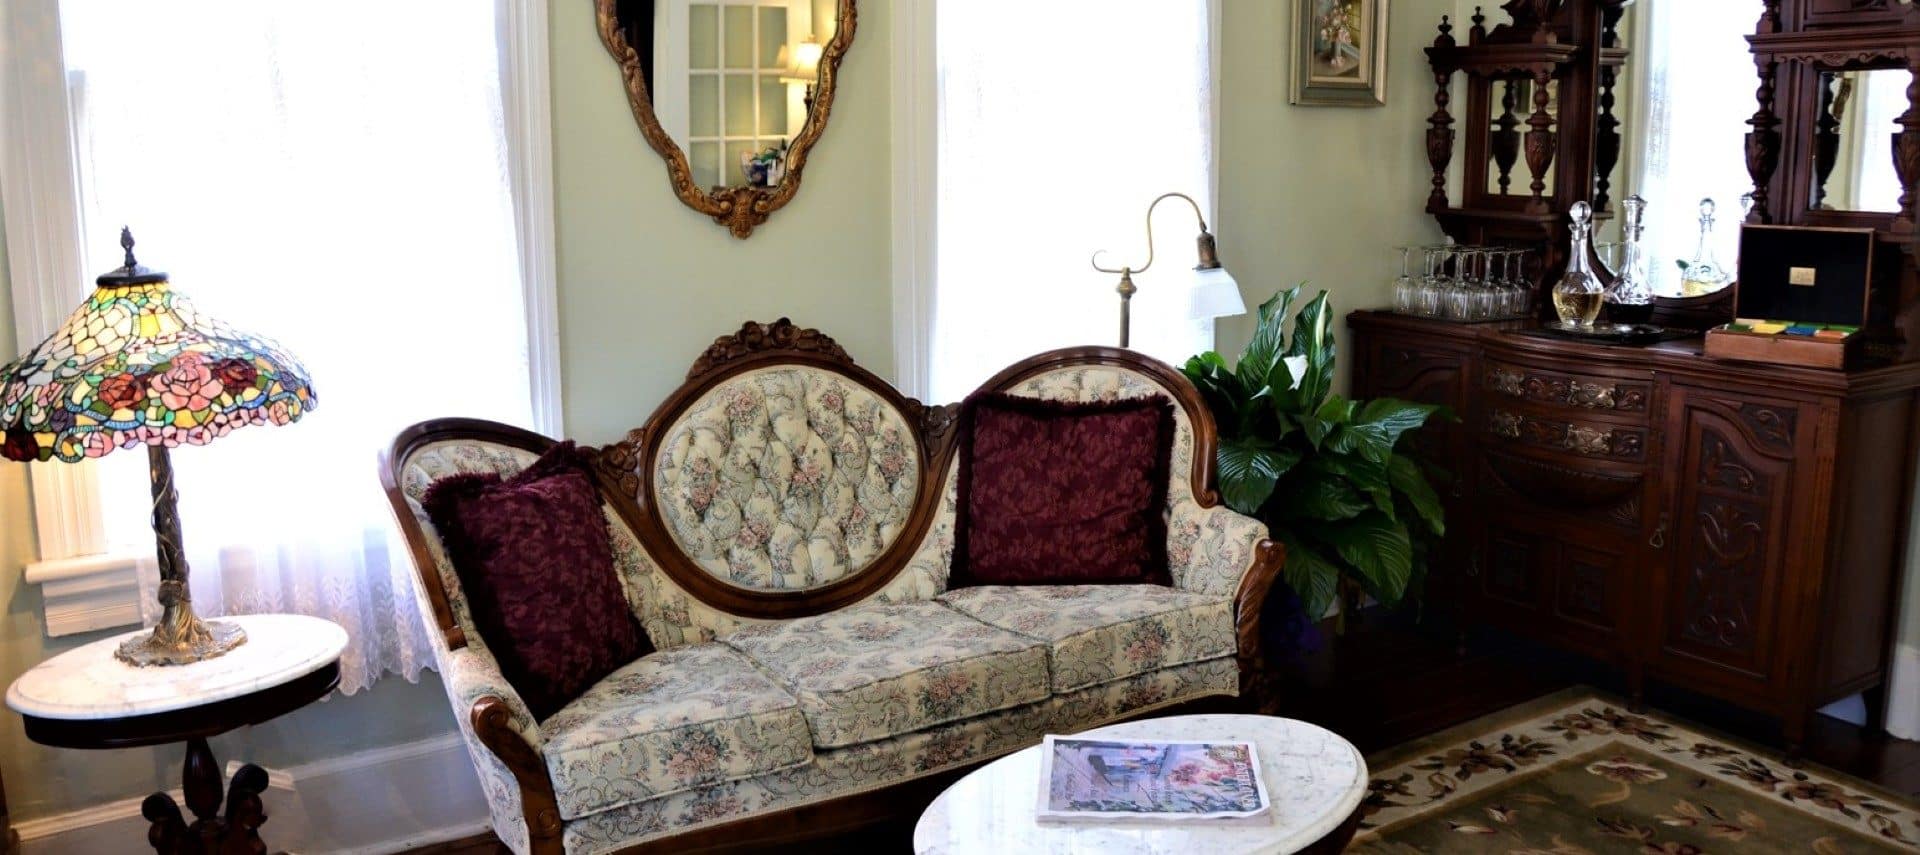 Sitting room with antique floral loveseat, bright windows and side table with Tiffany lamp